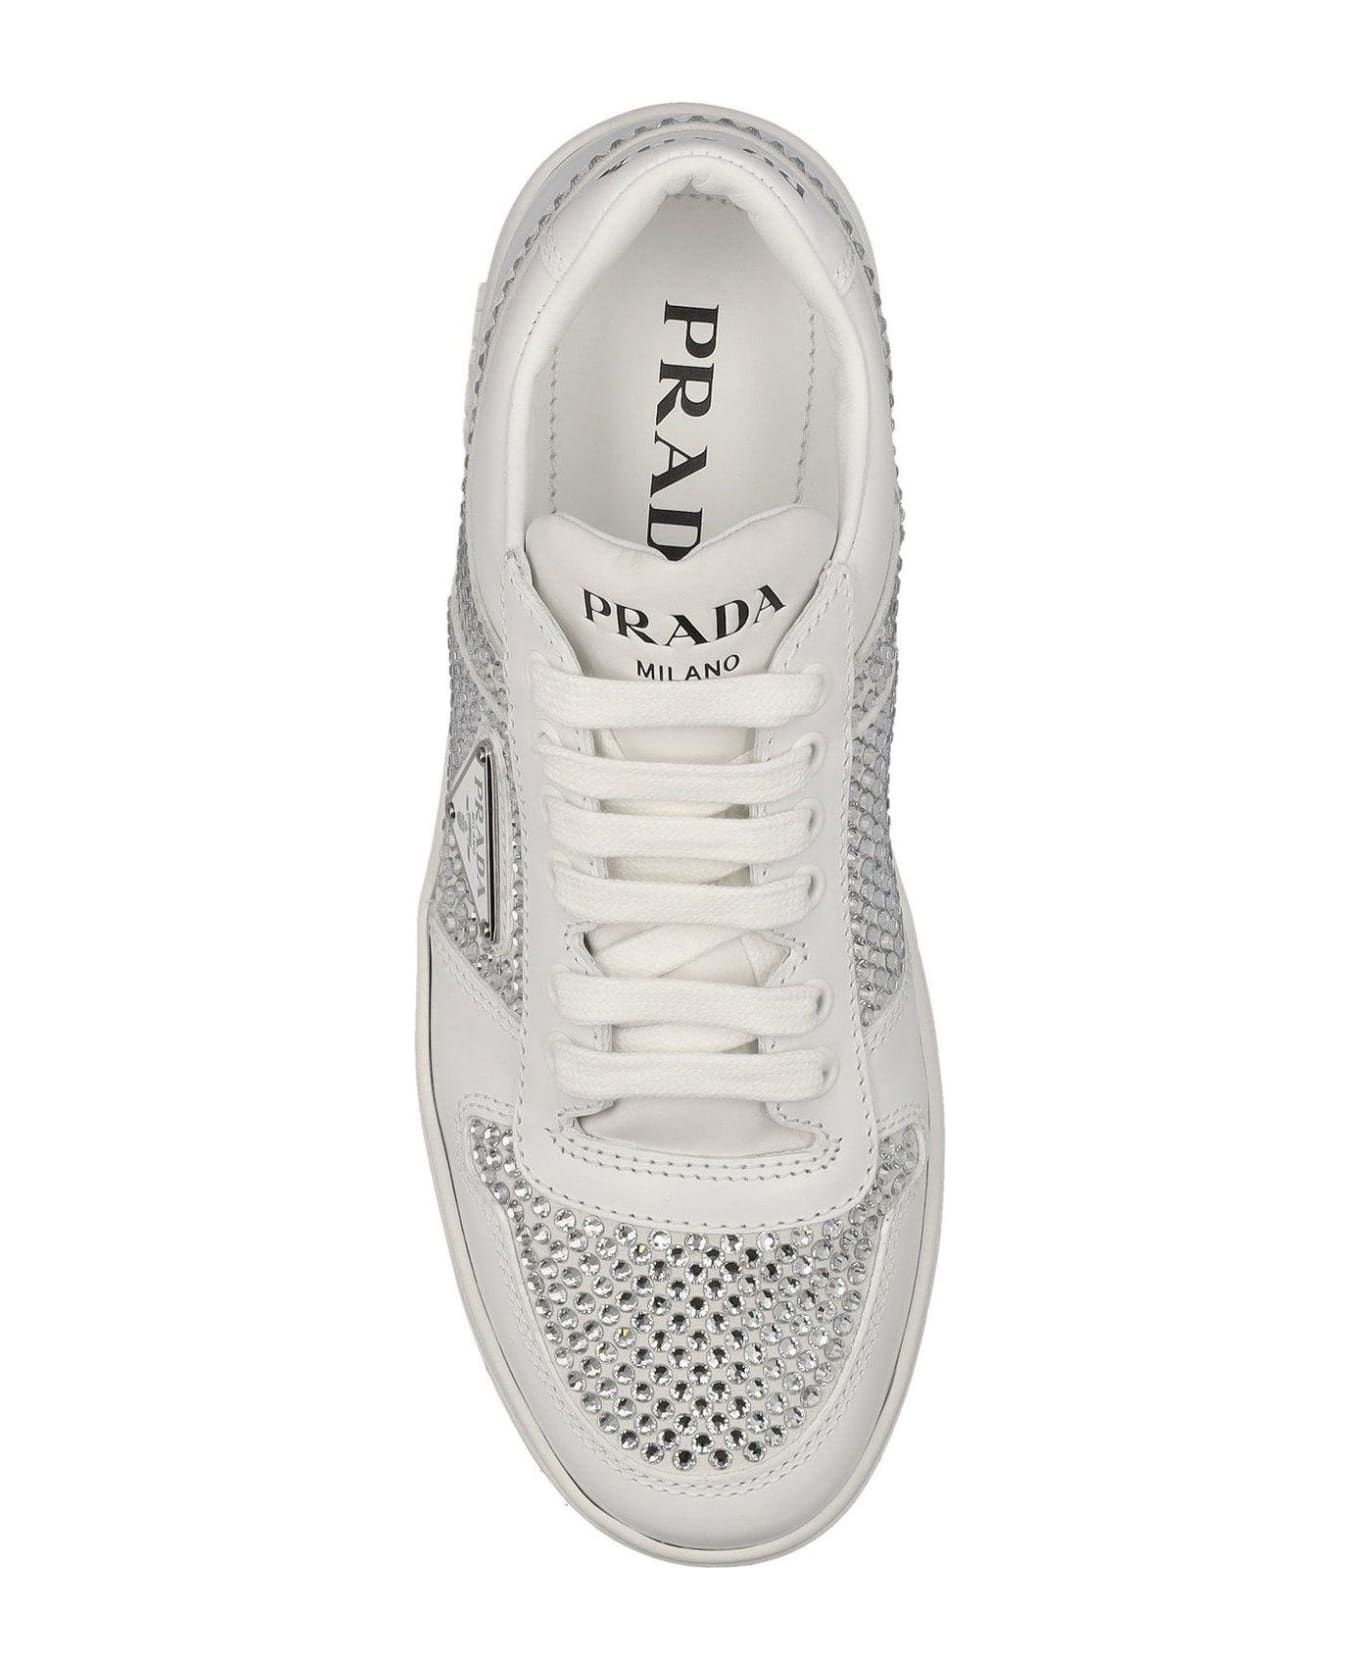 Prada Embellished Lace-up Sneakers スニーカー